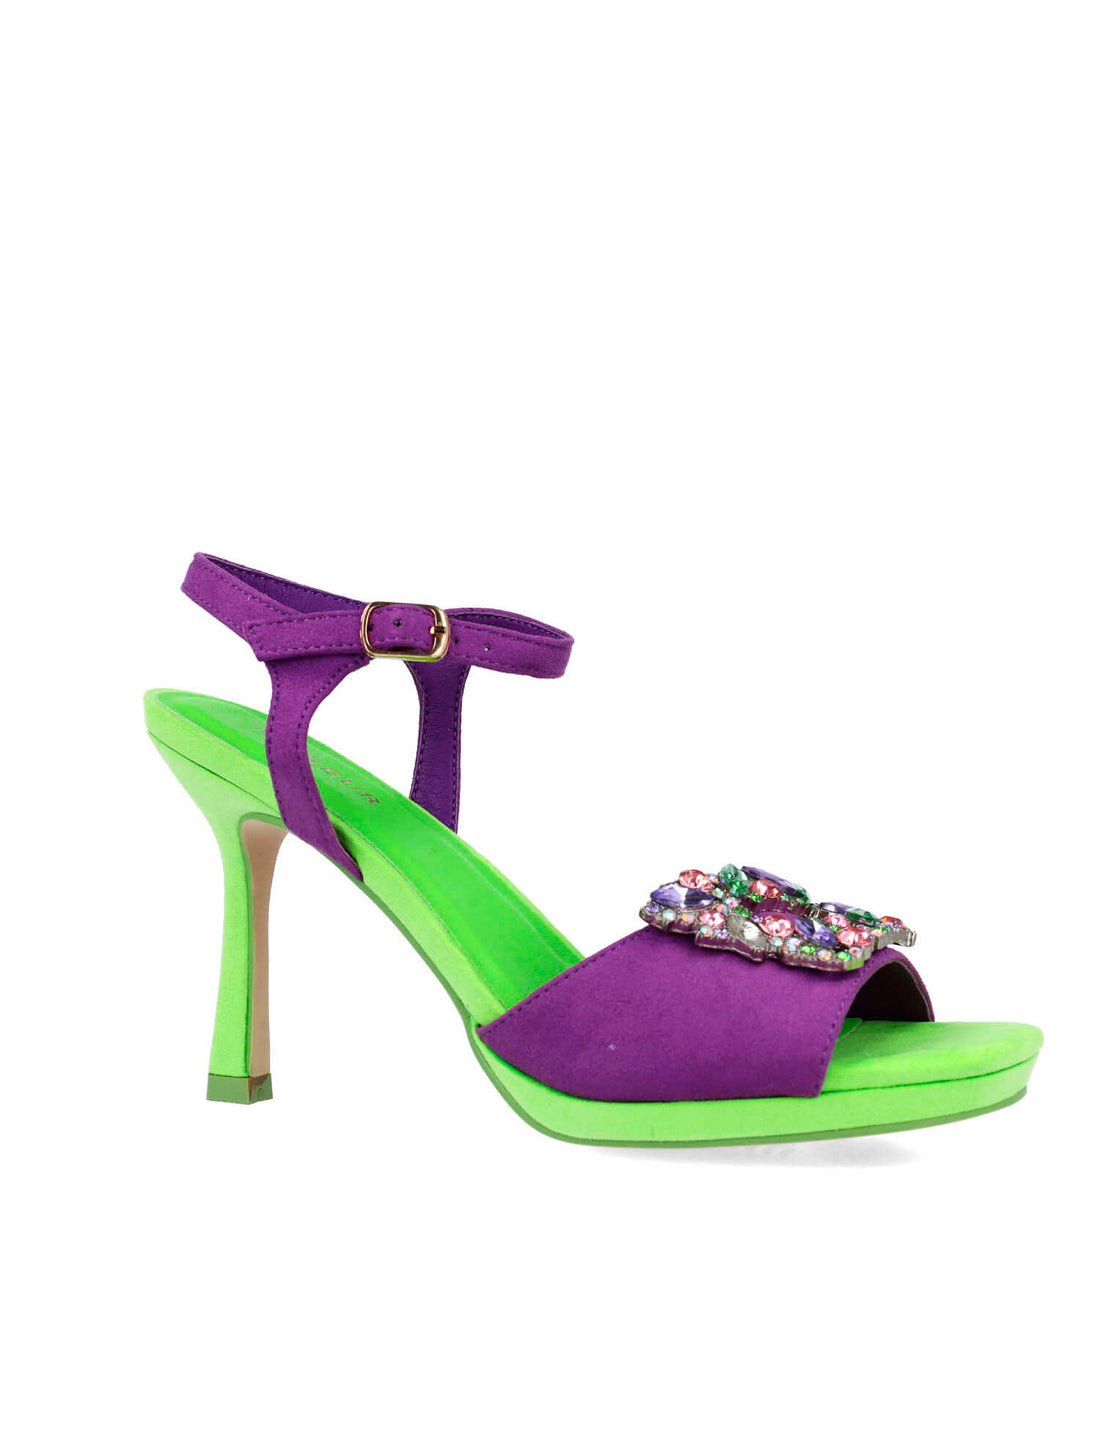 Multi-Color High-Heel Sandals With Embellishment_25259_08_02